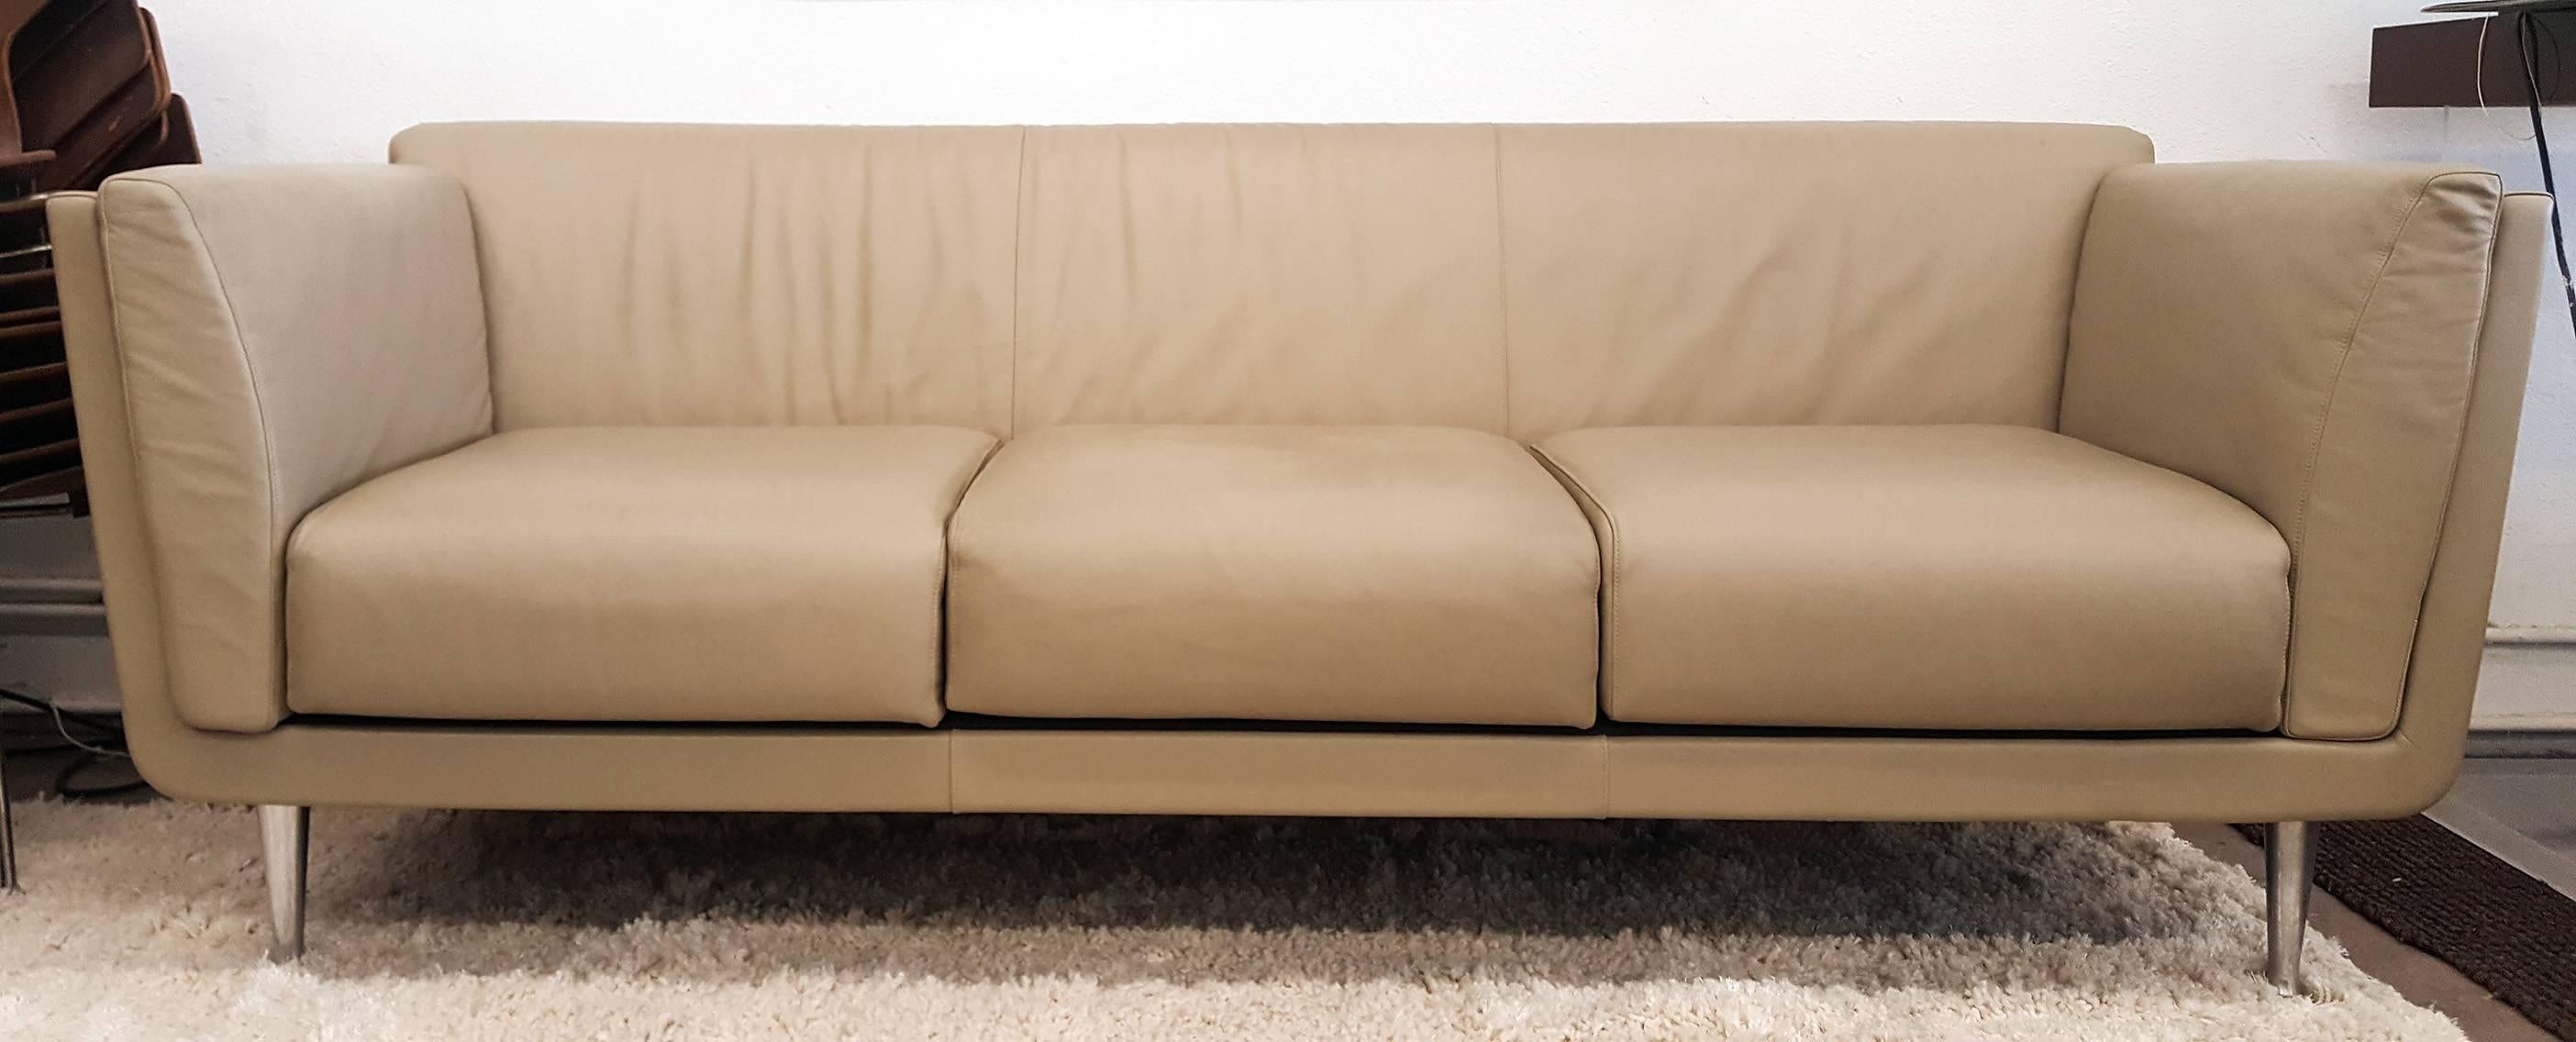 A stunning example of modern design, this sofa designed by Mark Goetz for Herman Miller has the clean lines and modern style that make this sofa a timeless classic. The sofa is encased in a cherrywood that wraps the sides as well as the back of the